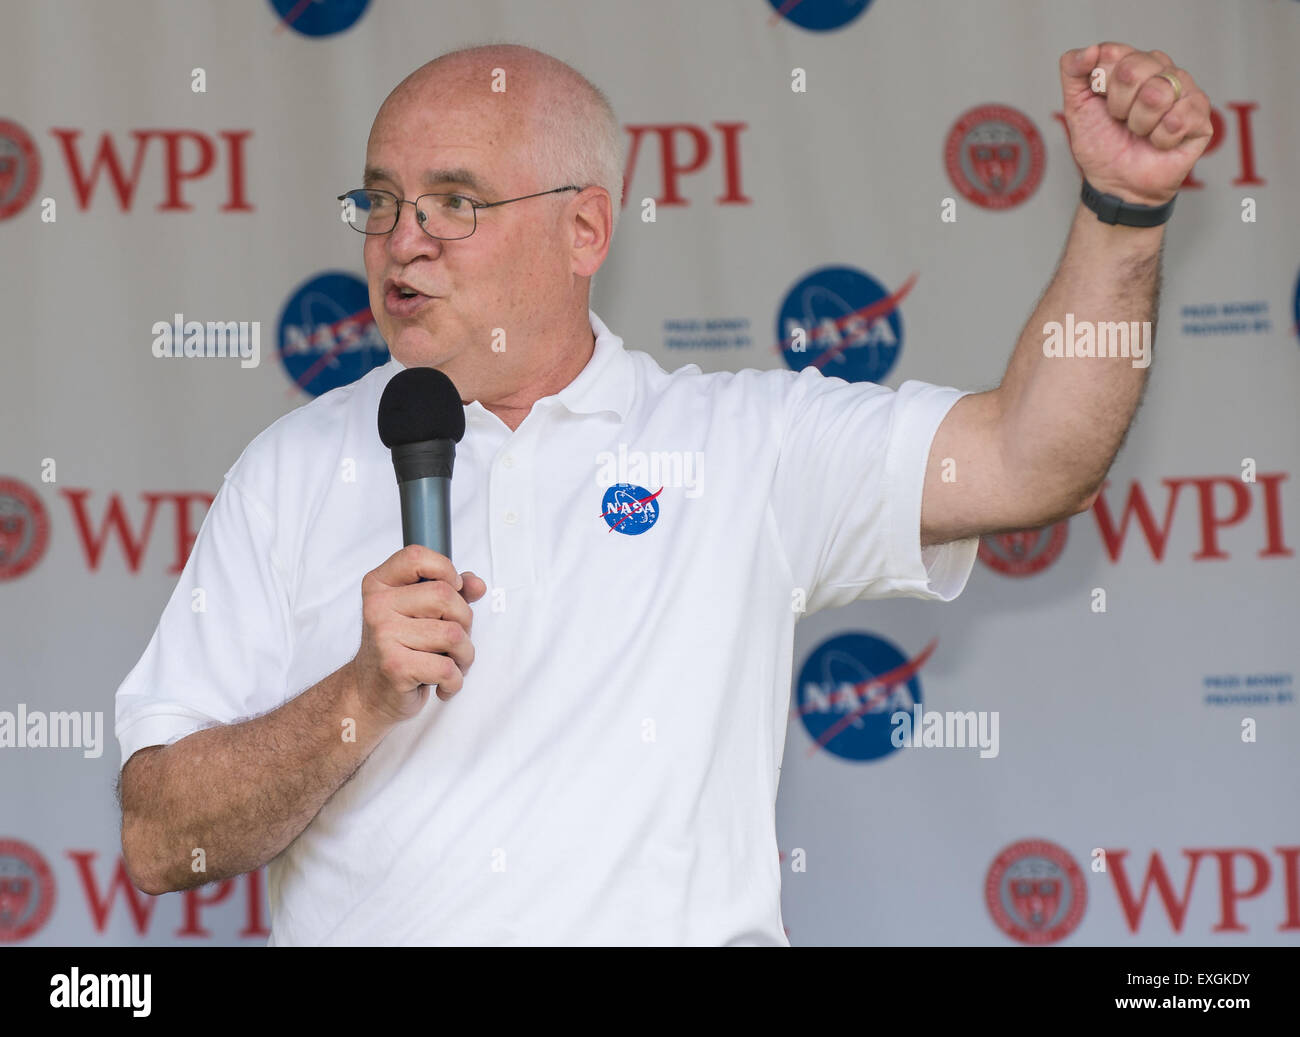 Dennis Andrucyk, deputy associate administrator for the Space Technology Mission Directorate at NASA Headquarters, speaks during the opening of the TouchTomorrow Festival, held in conjunction with the 2015 Sample Return Robot Challenge, Saturday, June 13, 2015 at the Worcester Polytechnic Institute (WPI) in Worcester, Mass.  Sixteen teams competed for a $1.5 million NASA prize purse. Teams will be required to demonstrate autonomous robots that can locate and collect samples from a wide and varied terrain, operating without human control. The objective of this NASA-WPI Centennial Challenge is t Stock Photo